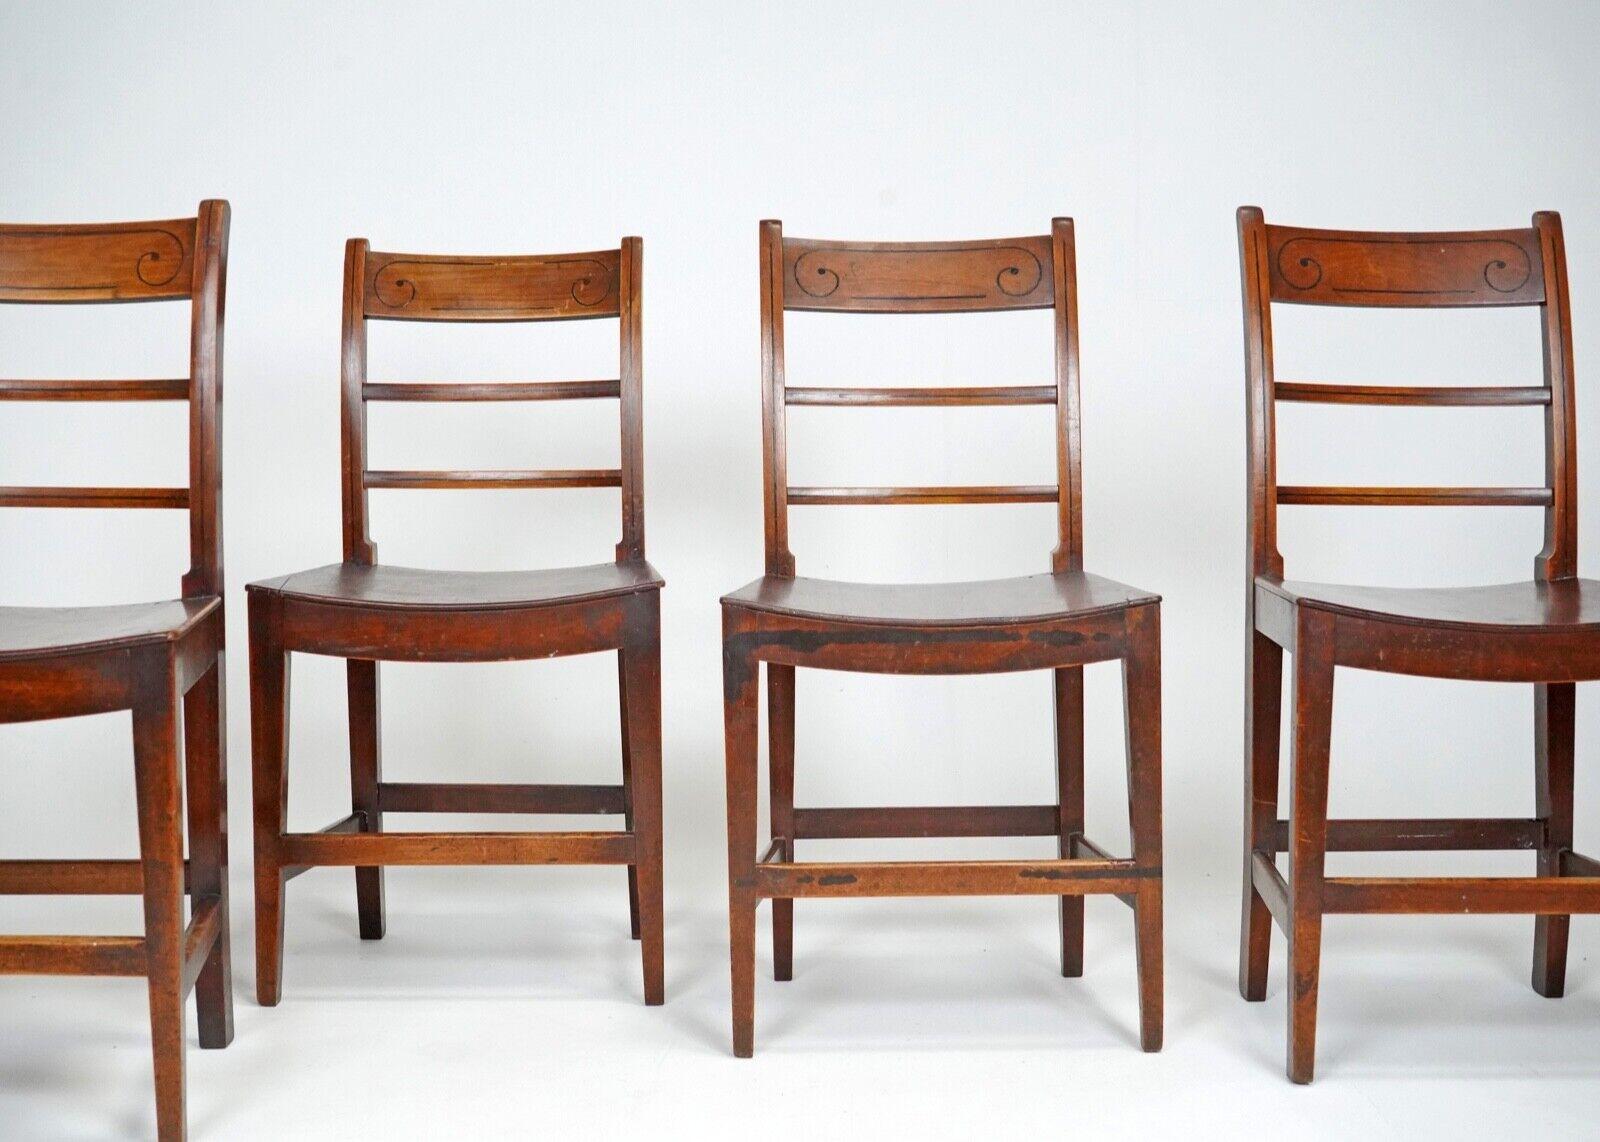 Set of four Welsh farmhouse chairs with a lovely inlaid Daliesque moustache detail that make these chairs a little more special.
Made from solid oak, that has a patina that only comes with age. 
A really charming set of chairs. 
Circa 1900. 
